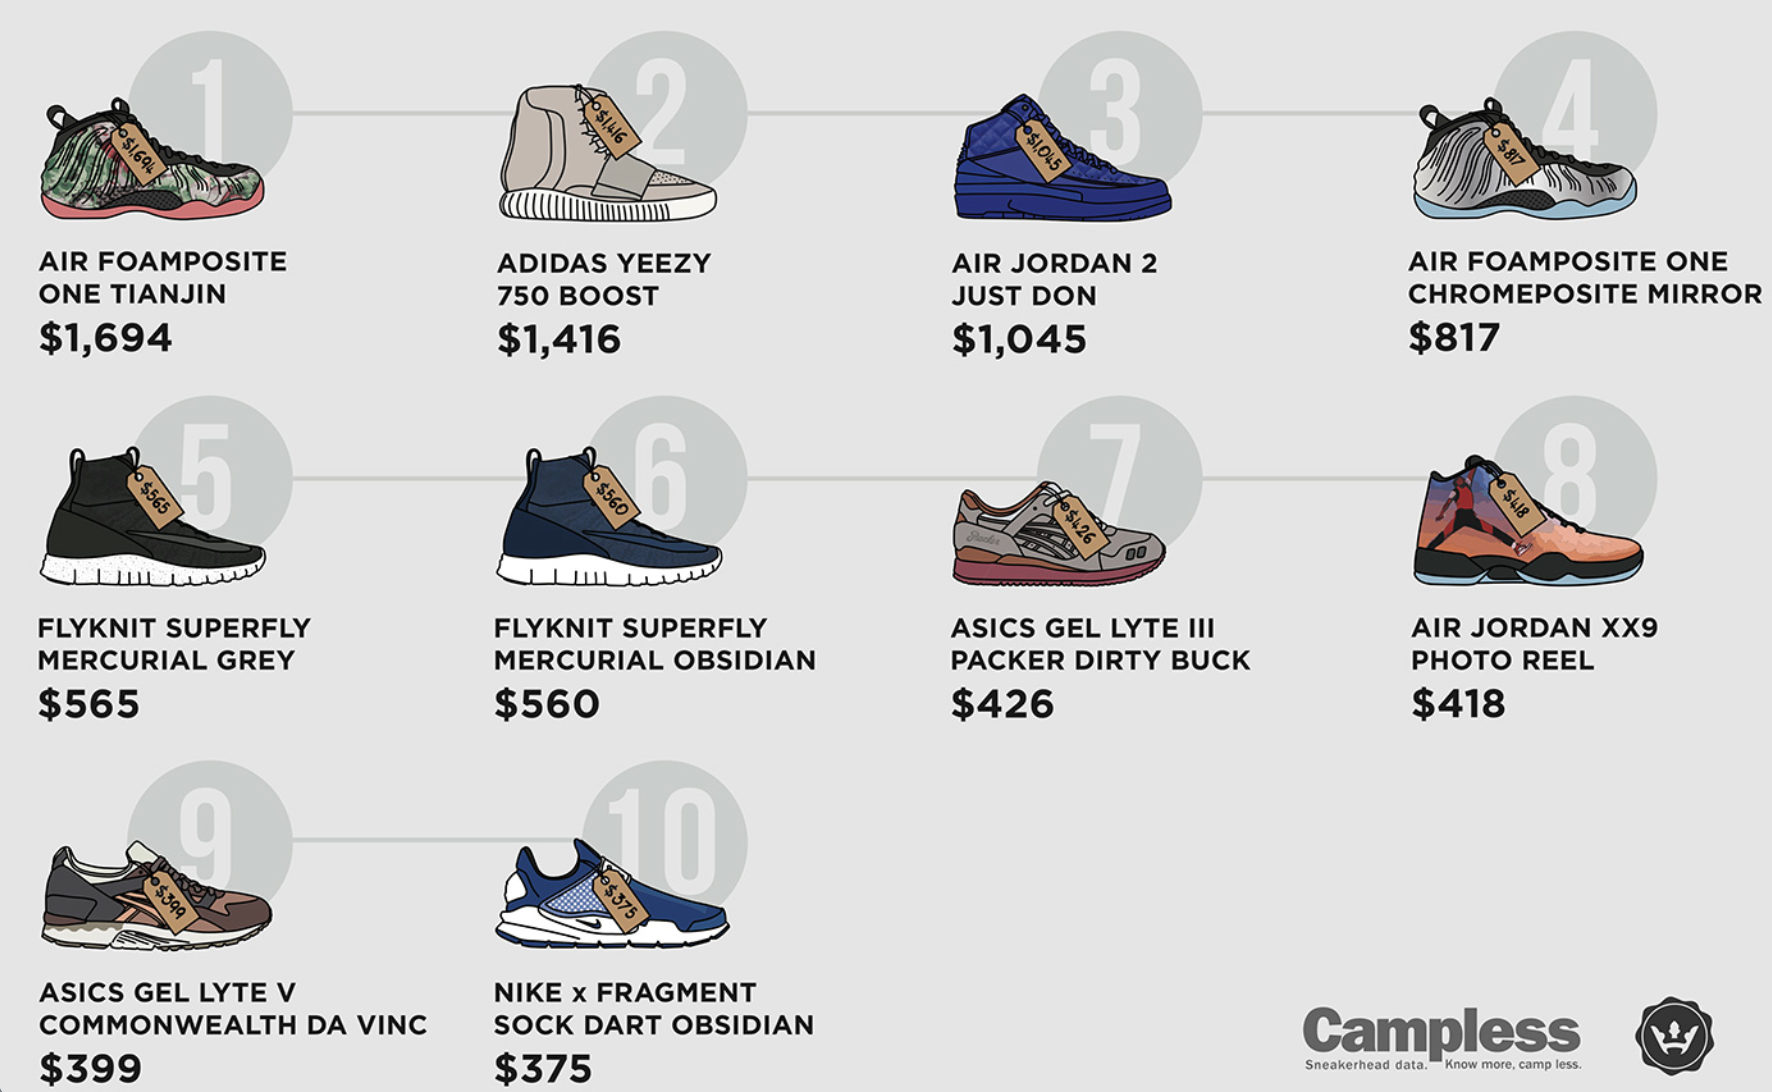 THE 10 MOST VALUABLE SNEAKERS – B O Y S 